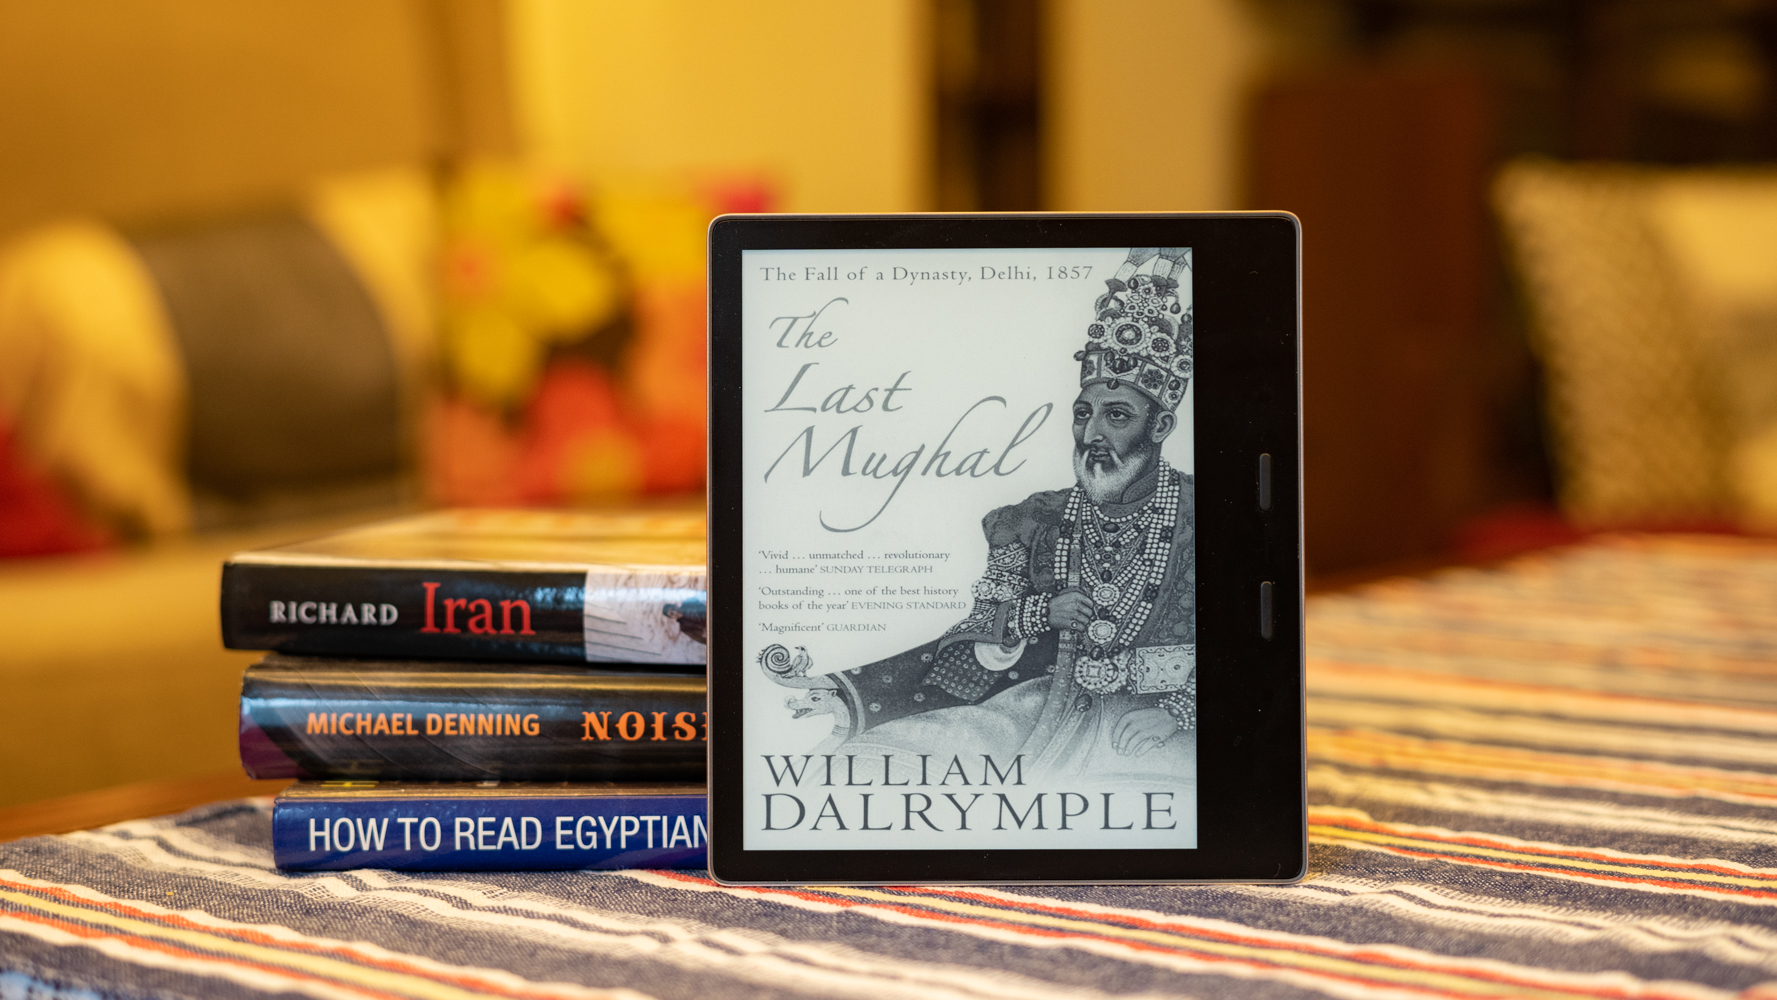 Amazon Kindle Oasis profile shot showing The Last Mughal by William Dalrymple on the screen, with a stack of books visible in the background